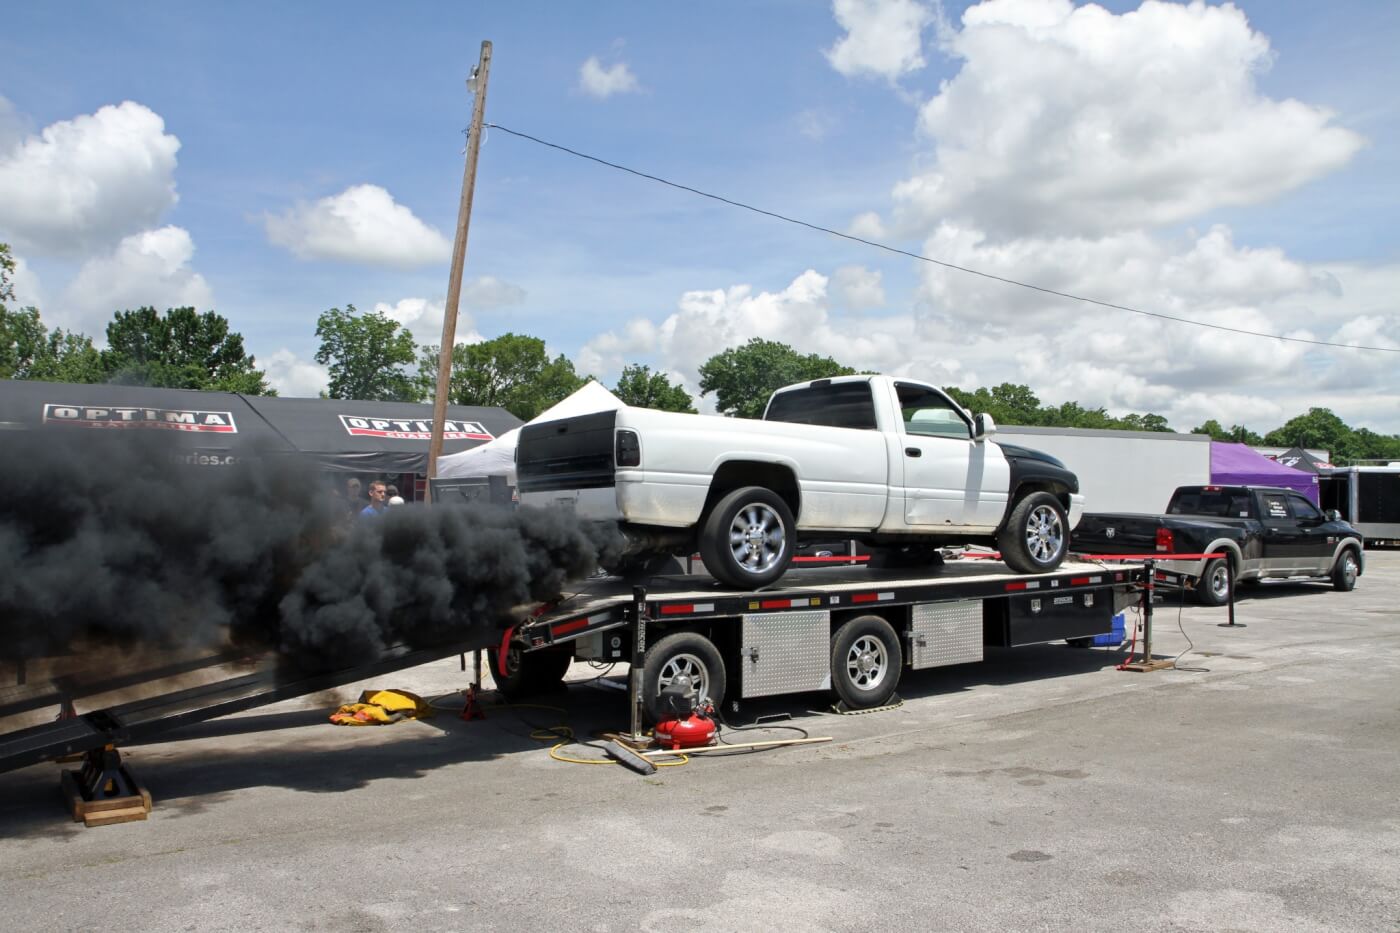 The crew from the DP-Tuner mobile dyno service had their Dynocom chassis dyno set up near the end of the vendor area. They ran 25 trucks across the rollers on Thursday including this Dodge; they also ran 15 more trucks on Saturday at the park.